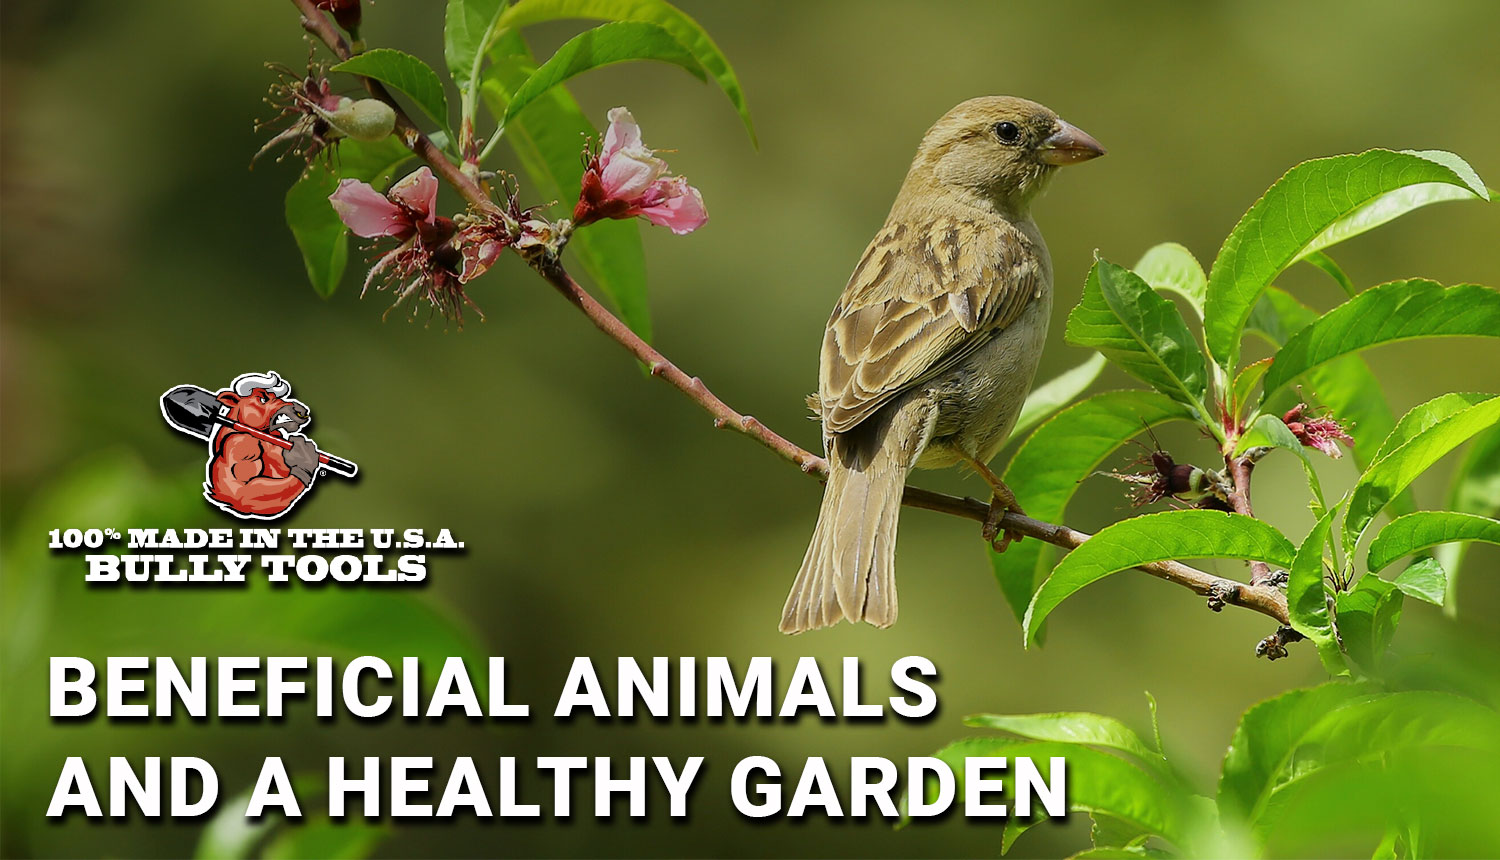 Beneficial Animals and a Healthy Garden - Bully Tools, Inc.